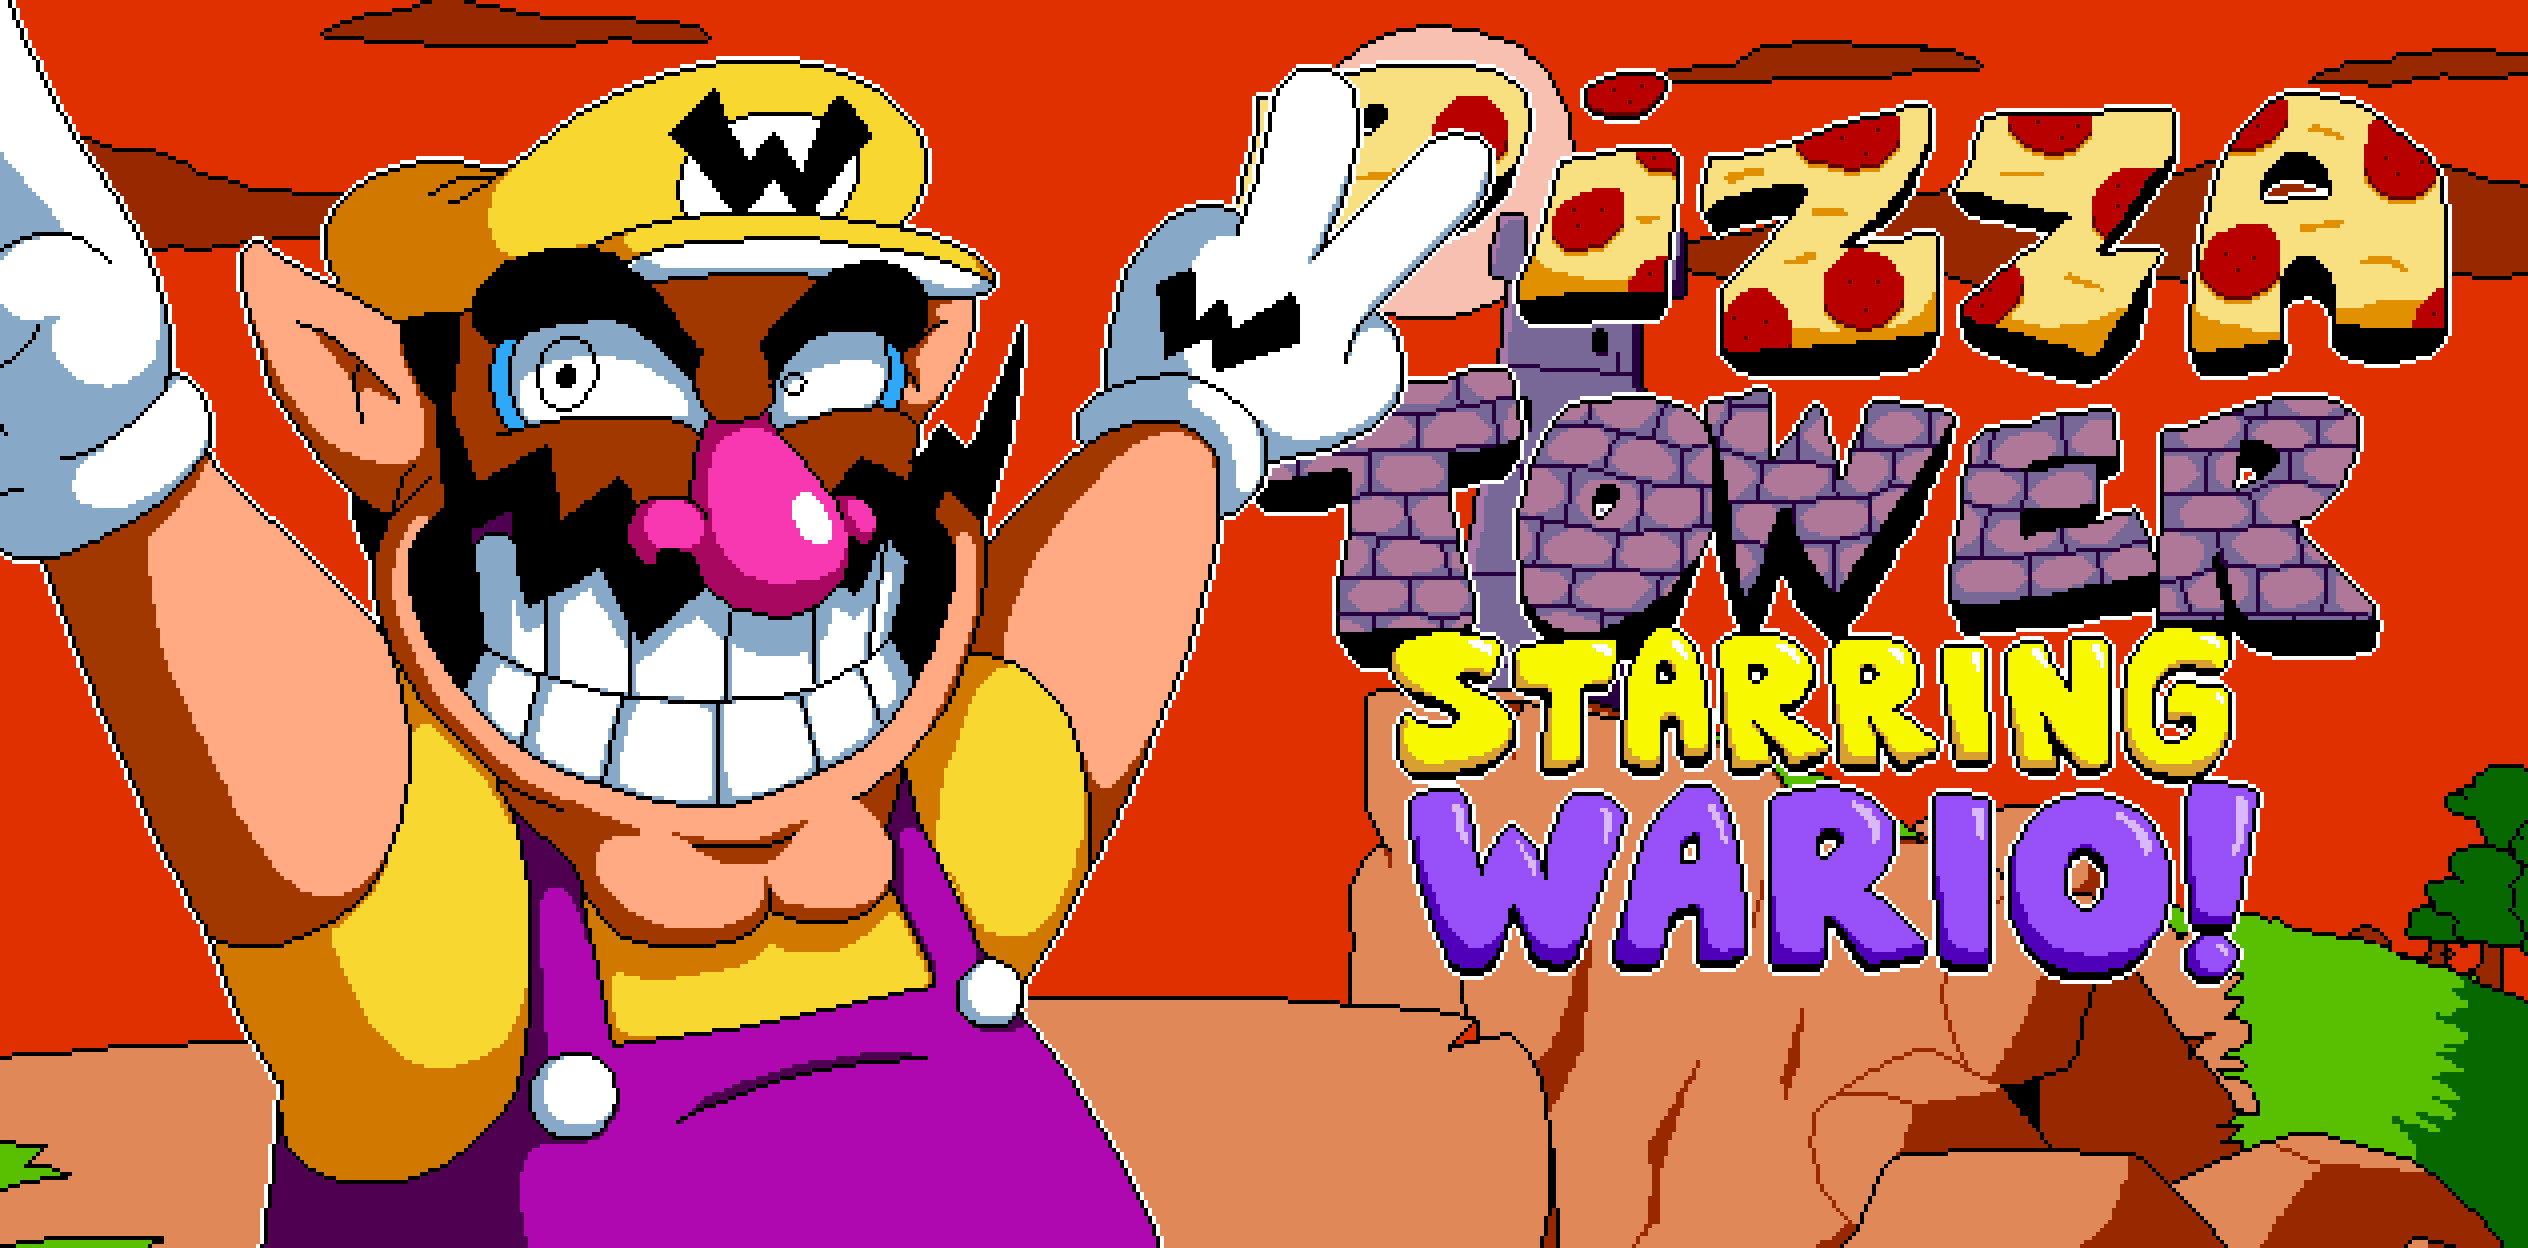 Pizza Tower: Starring Wario! [Pizza Tower] [Works In Progress]